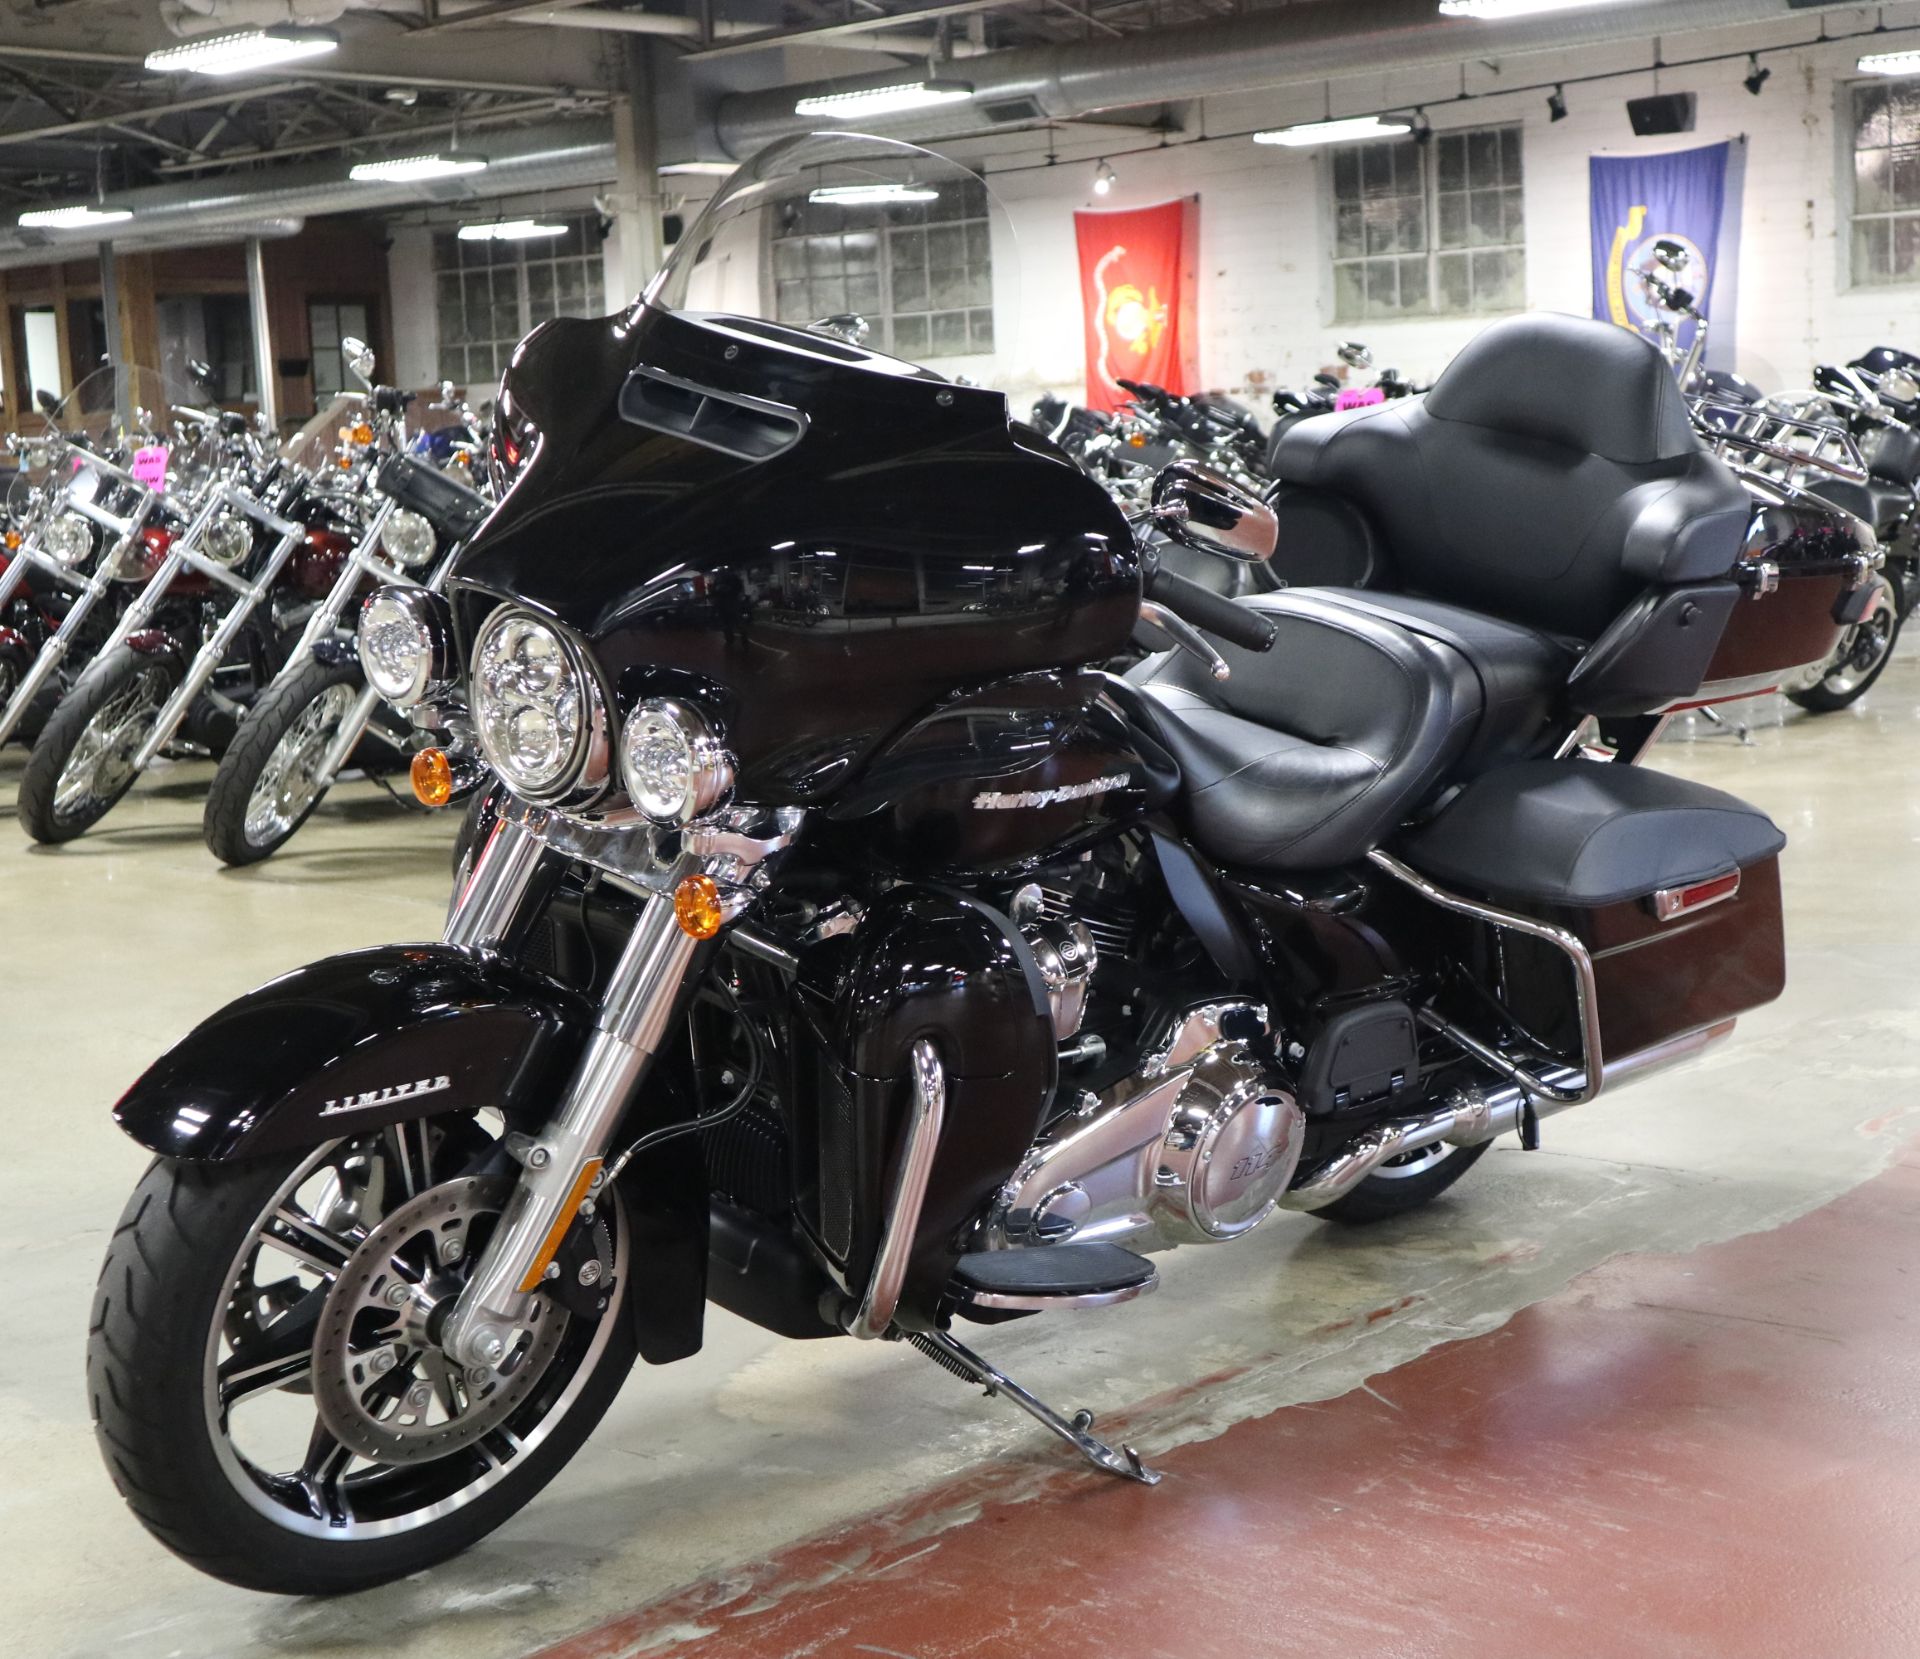 2021 Harley-Davidson Ultra Limited in New London, Connecticut - Photo 4